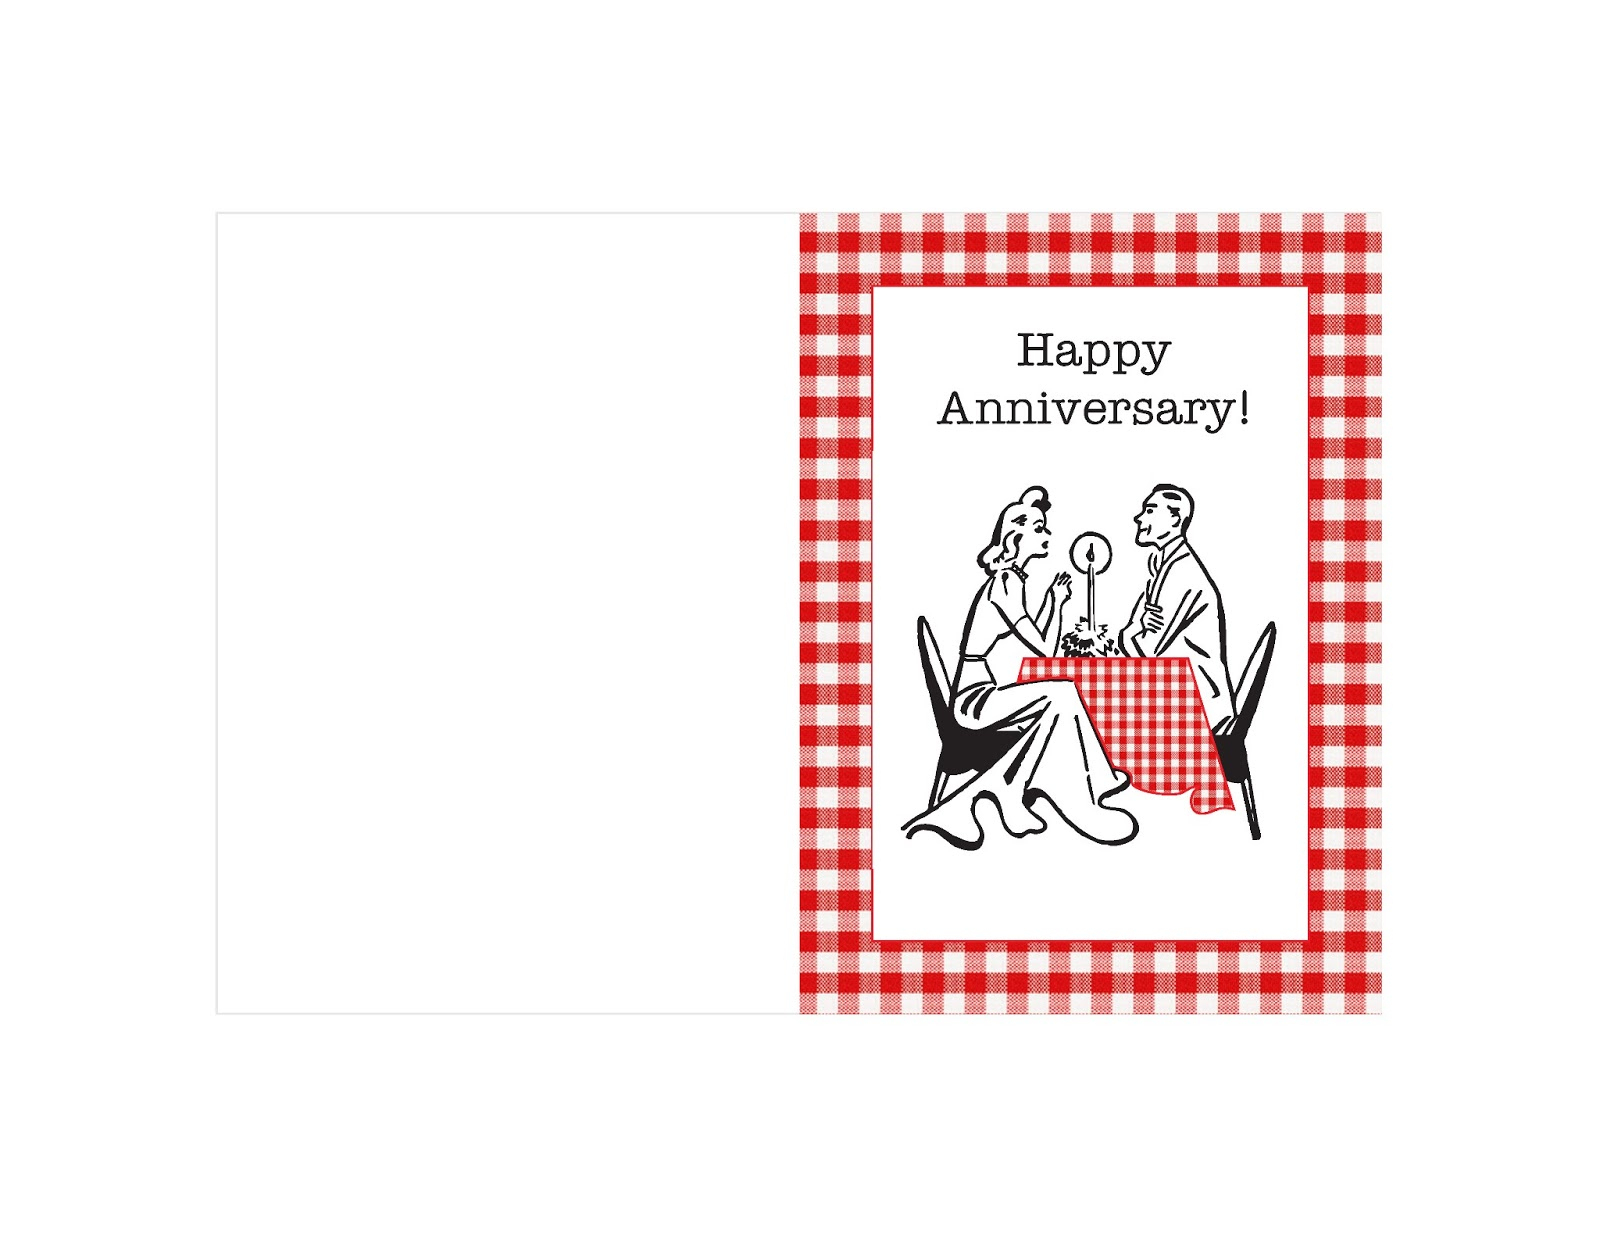 30 Free Printable Anniversary Cards | Kittybabylove - Free Printable Anniversary Cards